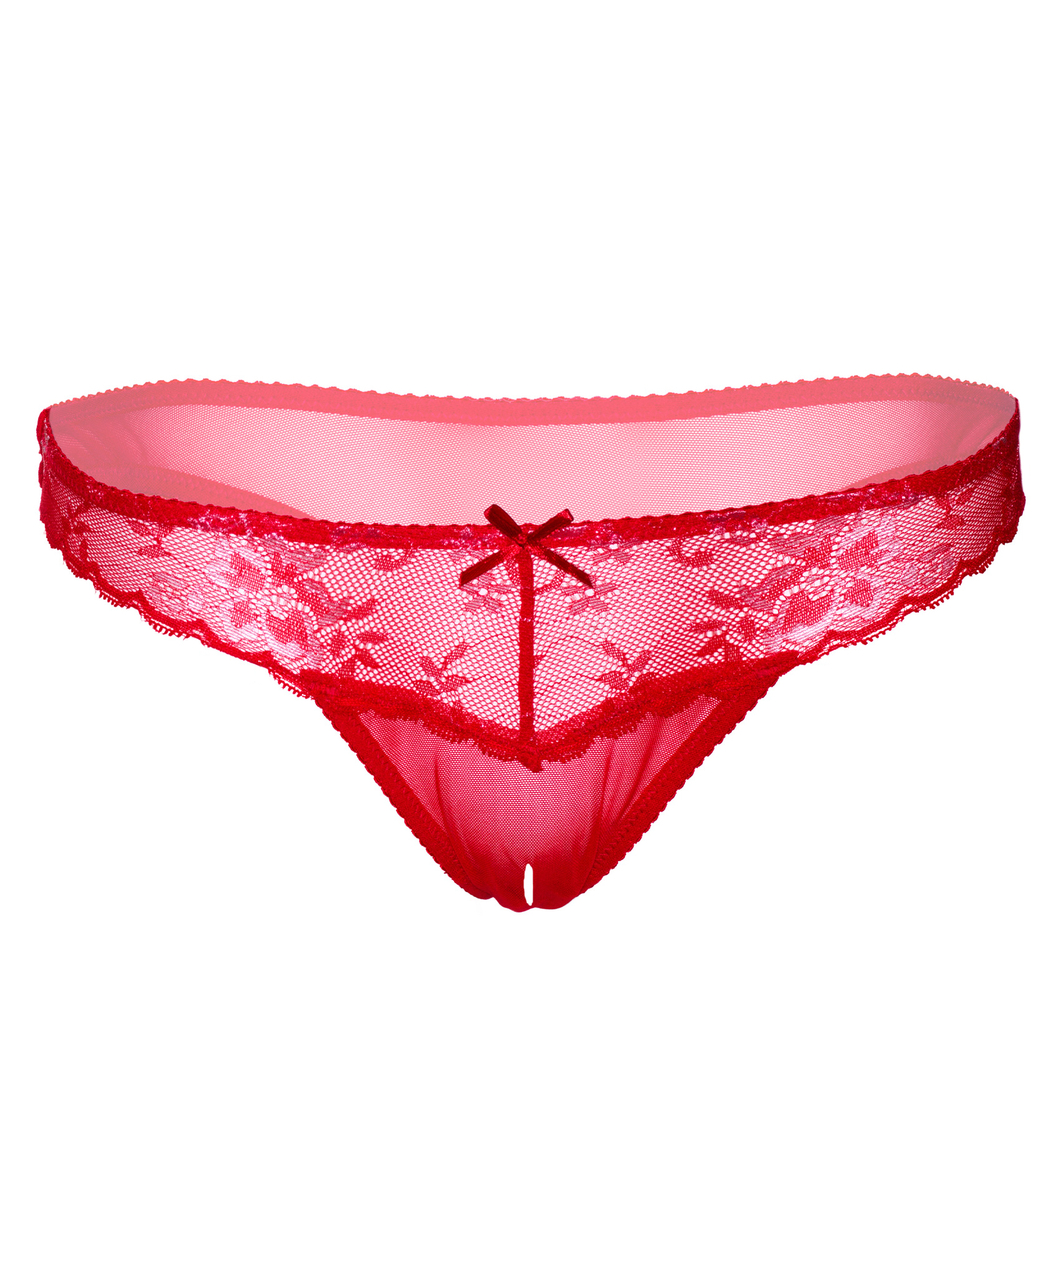 Daring Intimates red lace & mesh crotchless string